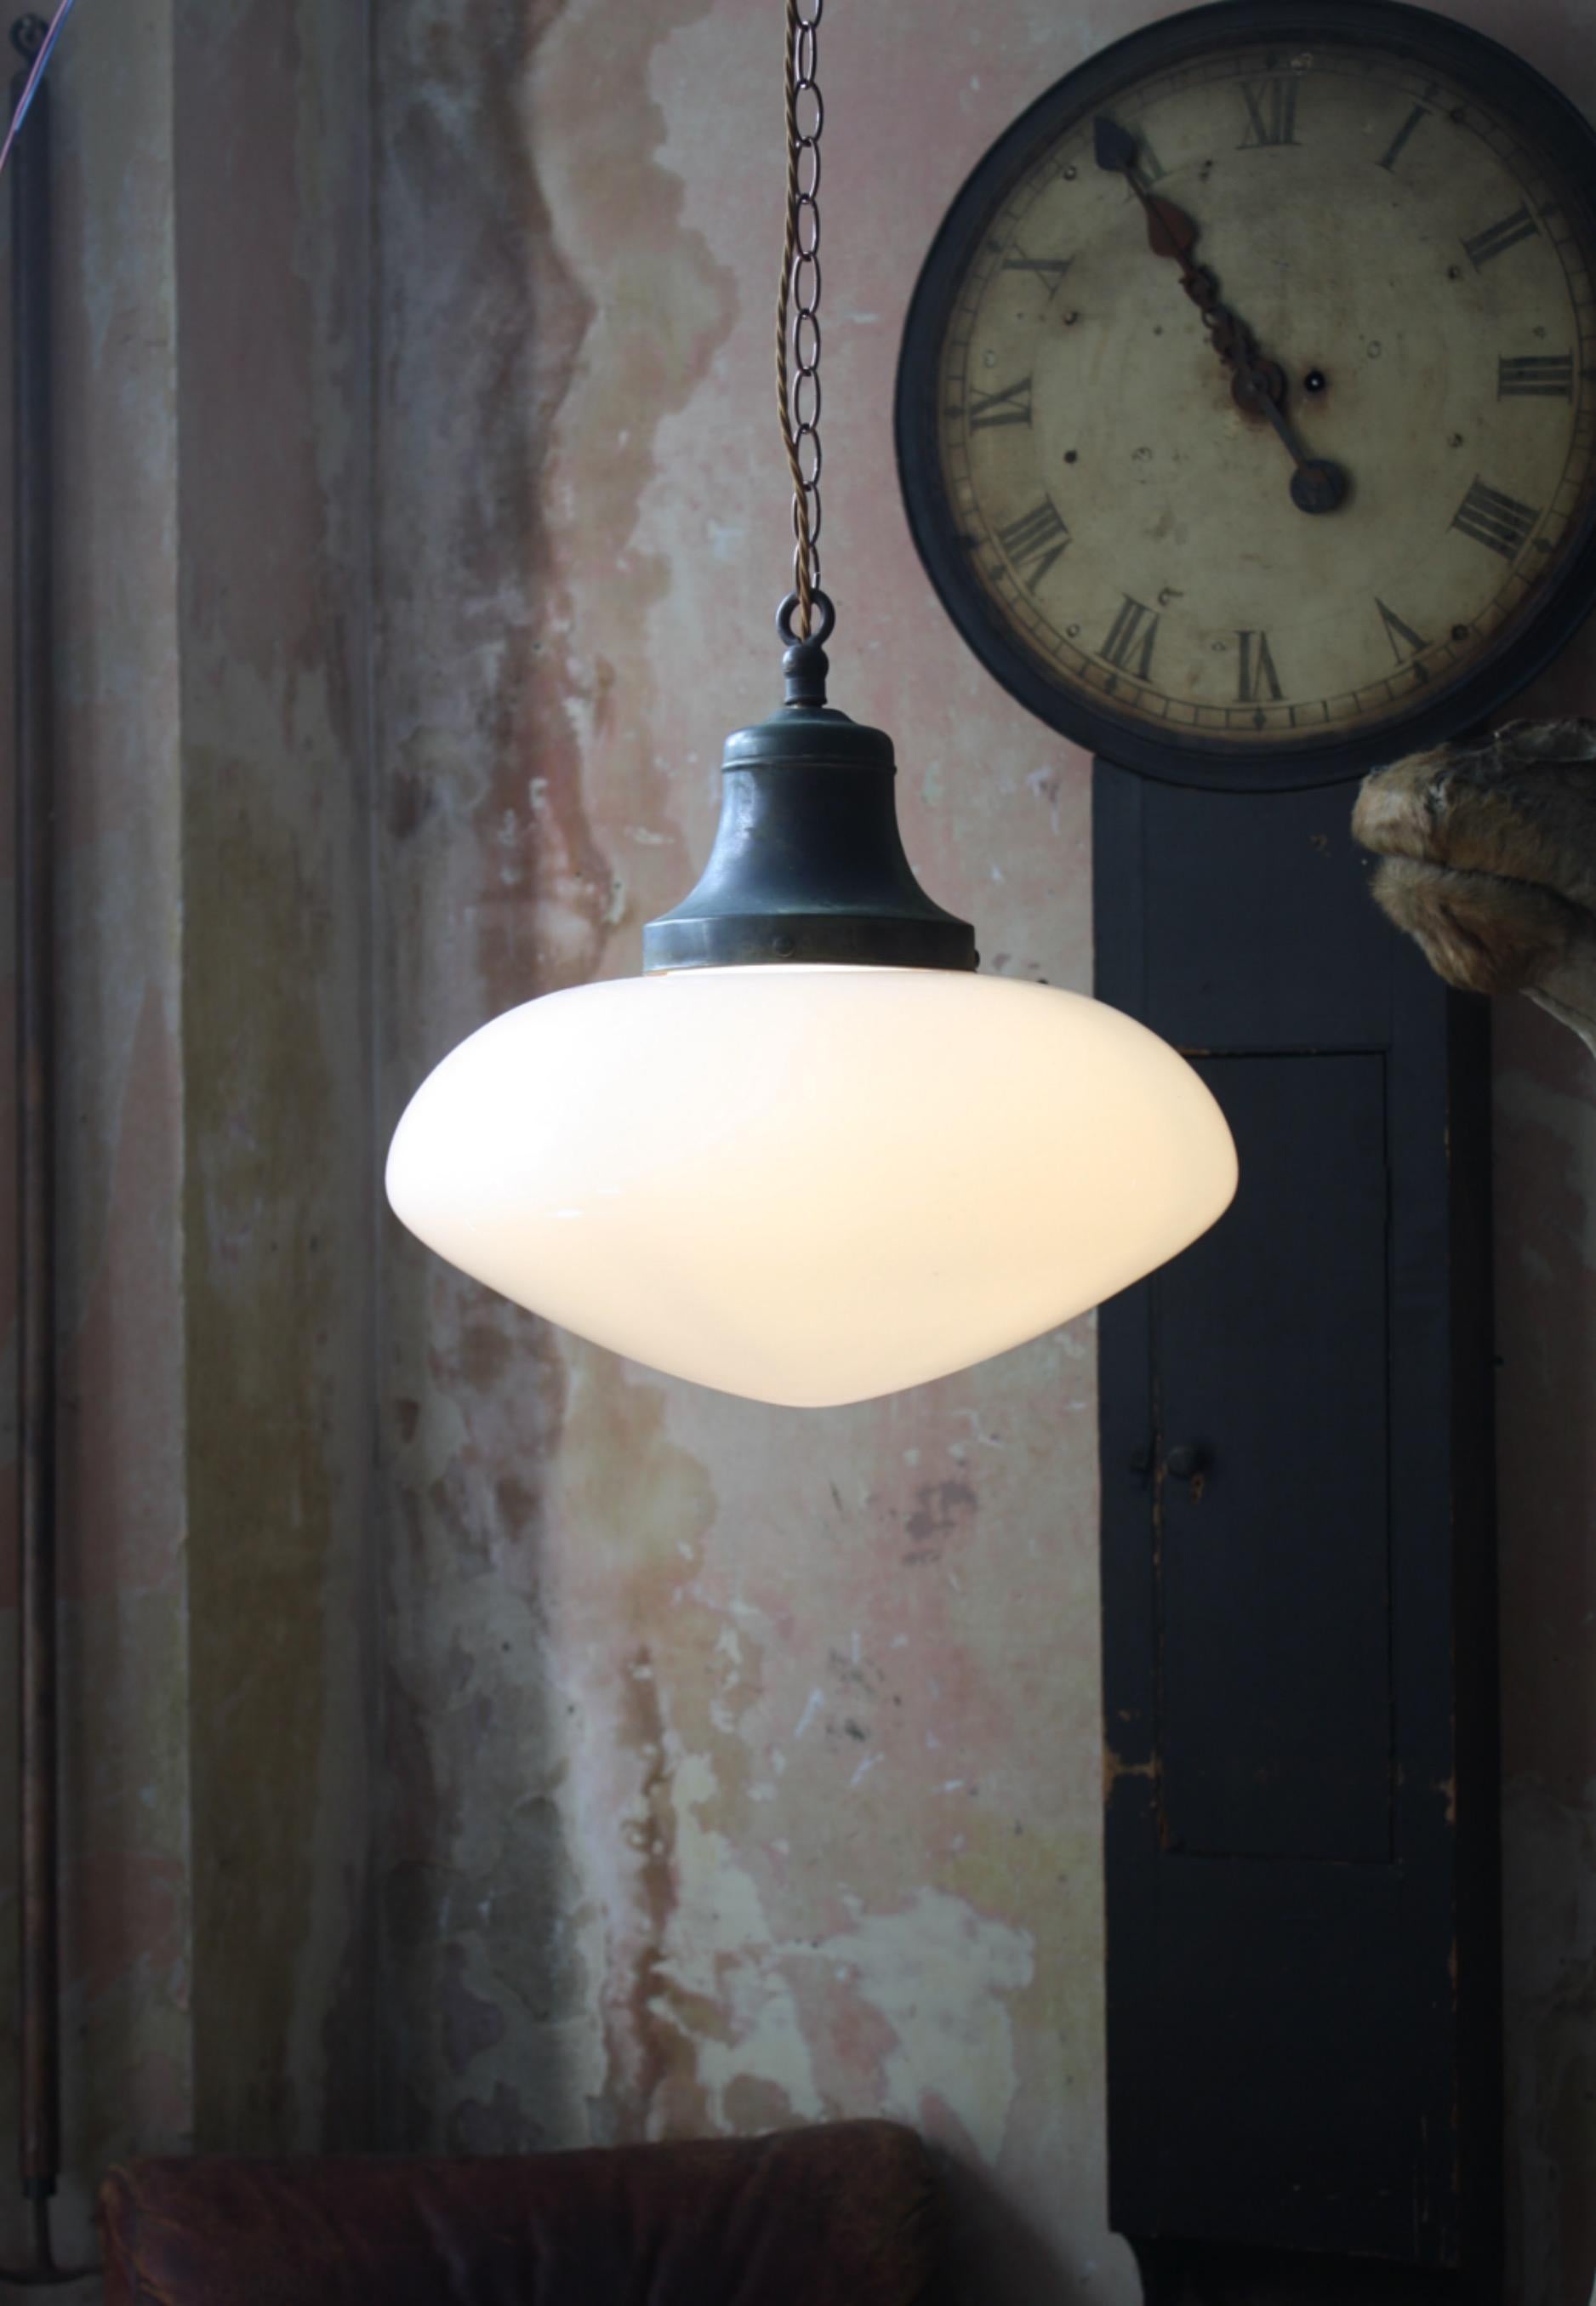 A good quality milk glass pendant with its original copper spun gallery.

First quarter of the 20th century in age, English in origins

Glass in perfect condition, age related verdigris oxidisation to the copper gallery.

The light comes with approx